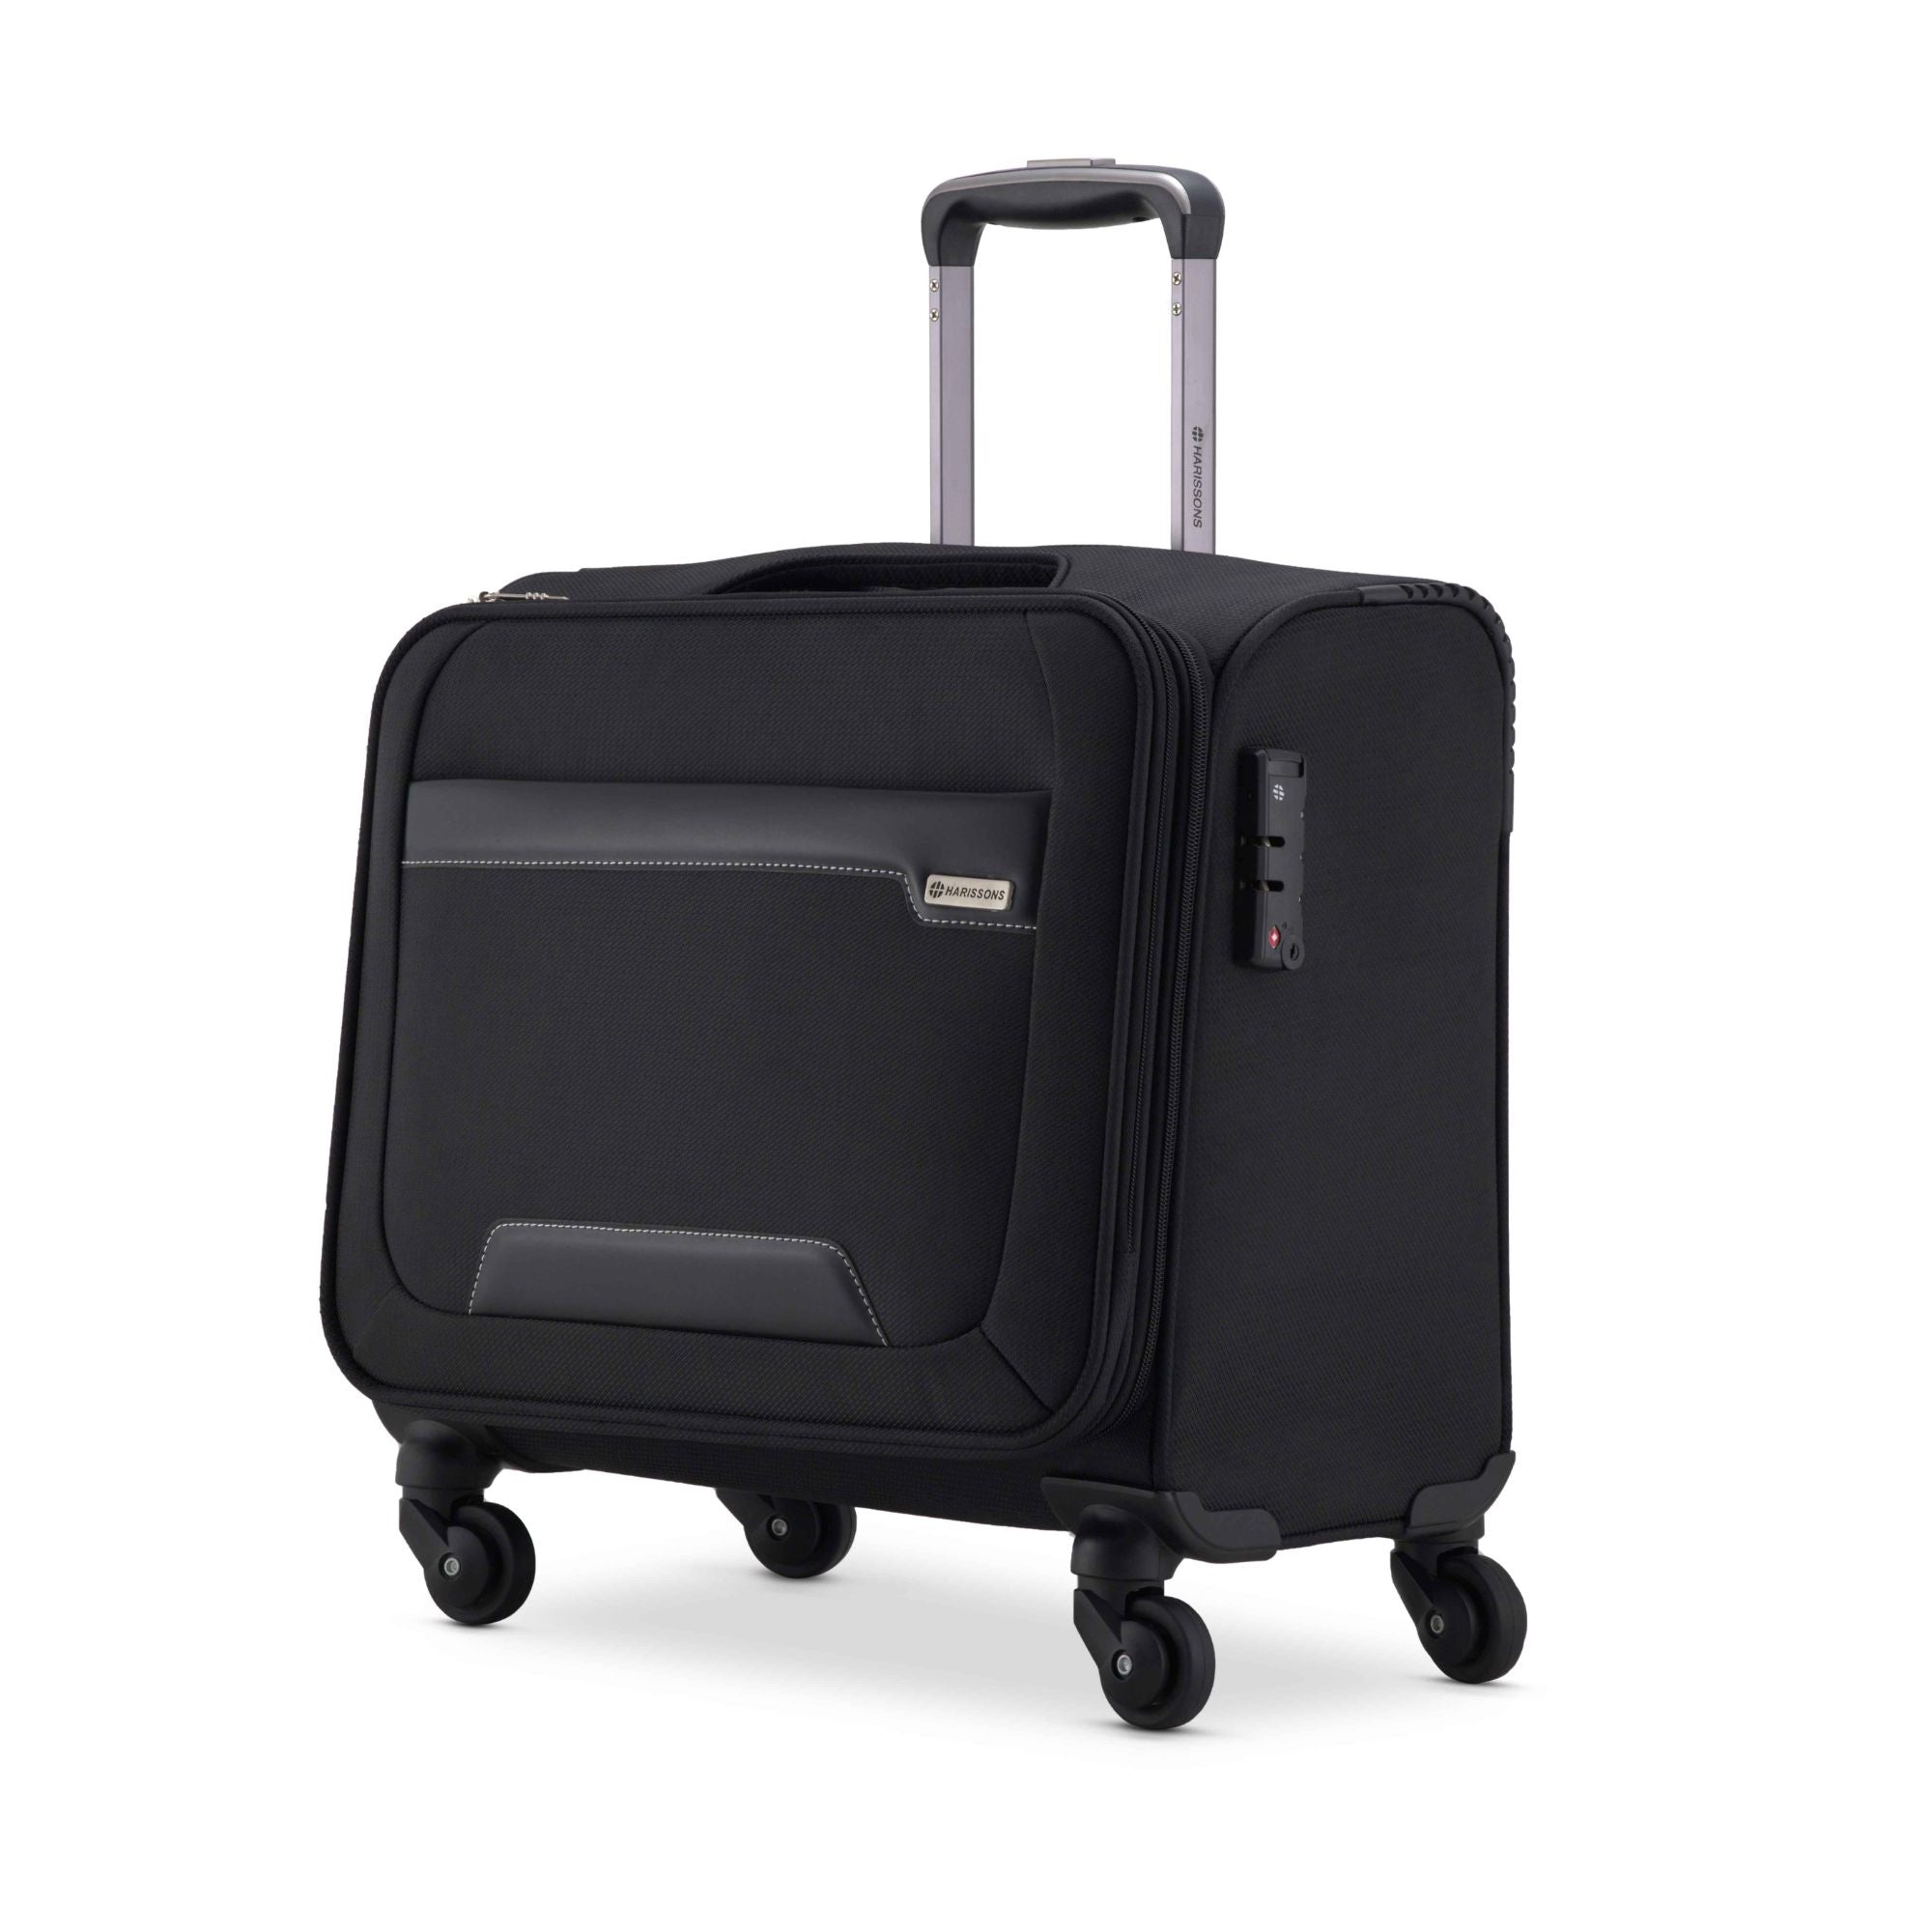 COLUMBUS - 41L Overnighter Cabin Trolley with Multi-USB Port